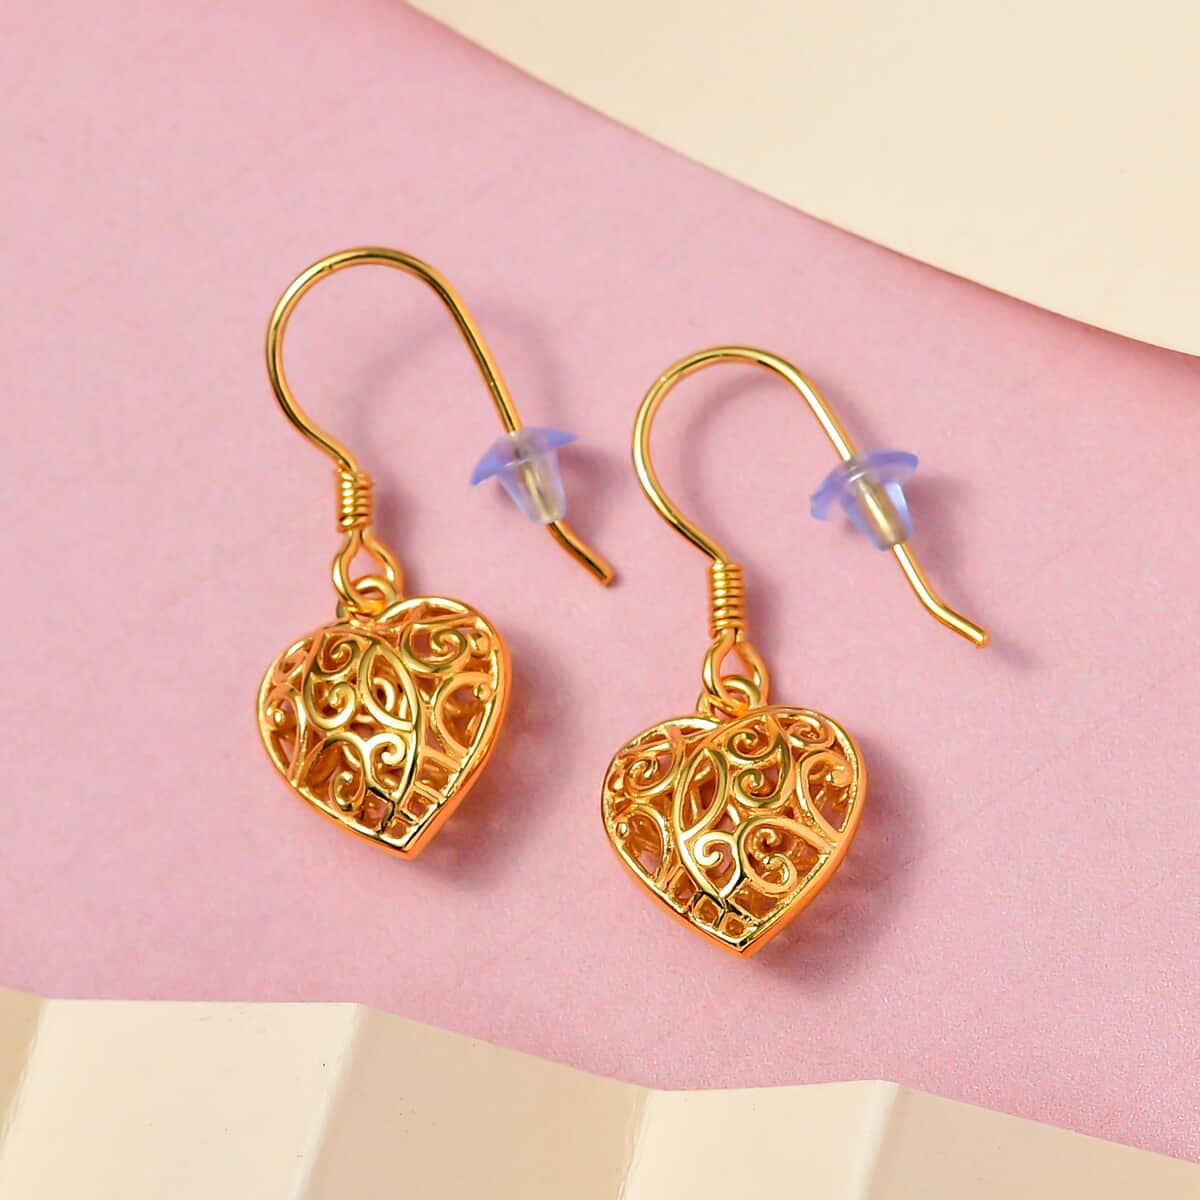 Mother’s Day Gift Openwork Drop Dangle Earrings in 14K Yellow Gold Plated Sterling Silver, Filigree Heart Earrings, Dangle Silver Earrings For Women image number 4